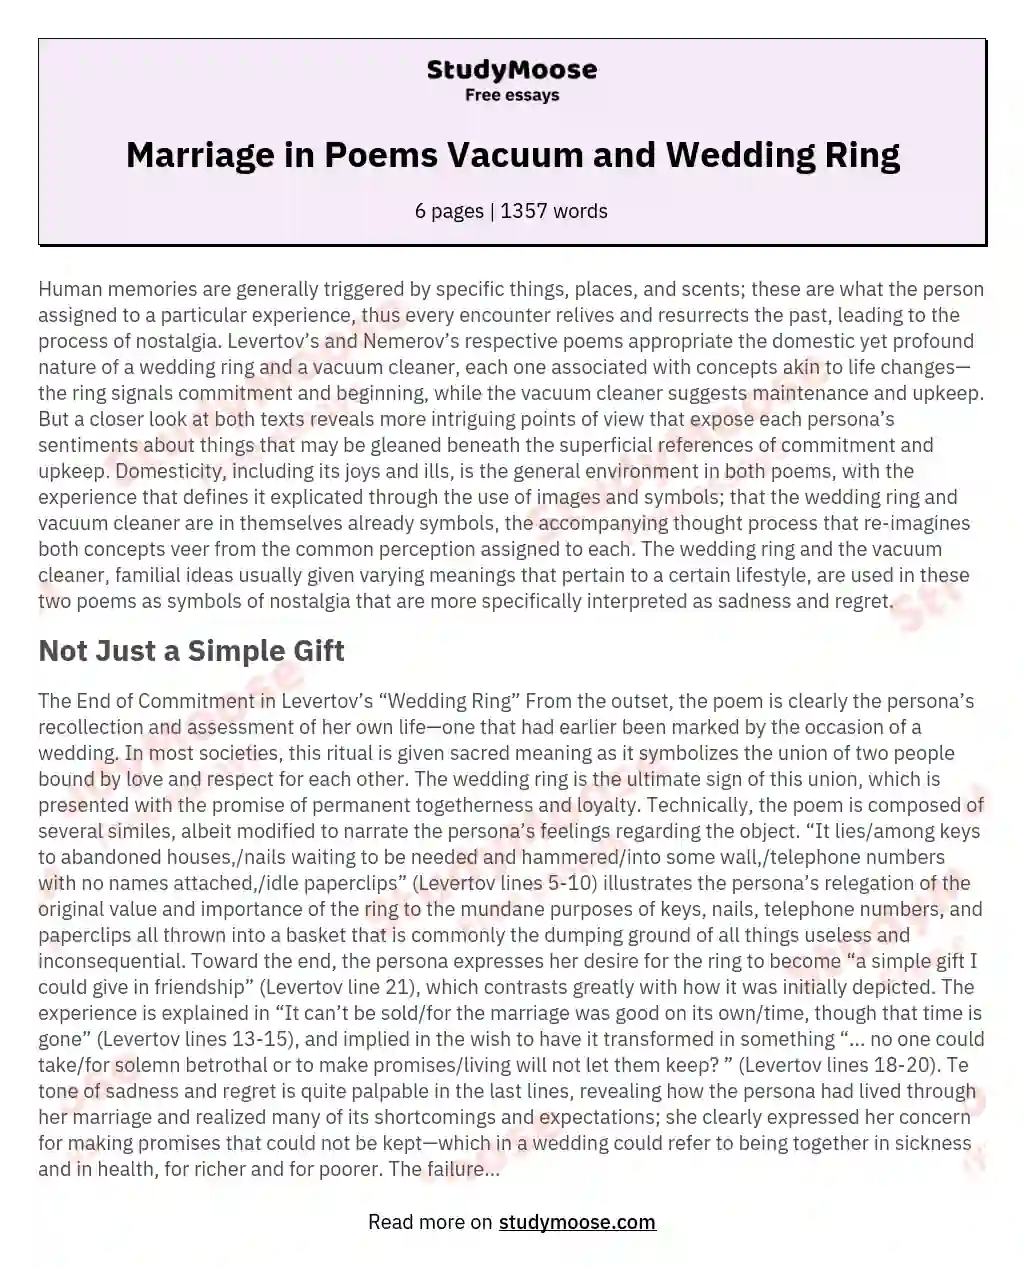 Marriage in Poems Vacuum and Wedding Ring essay